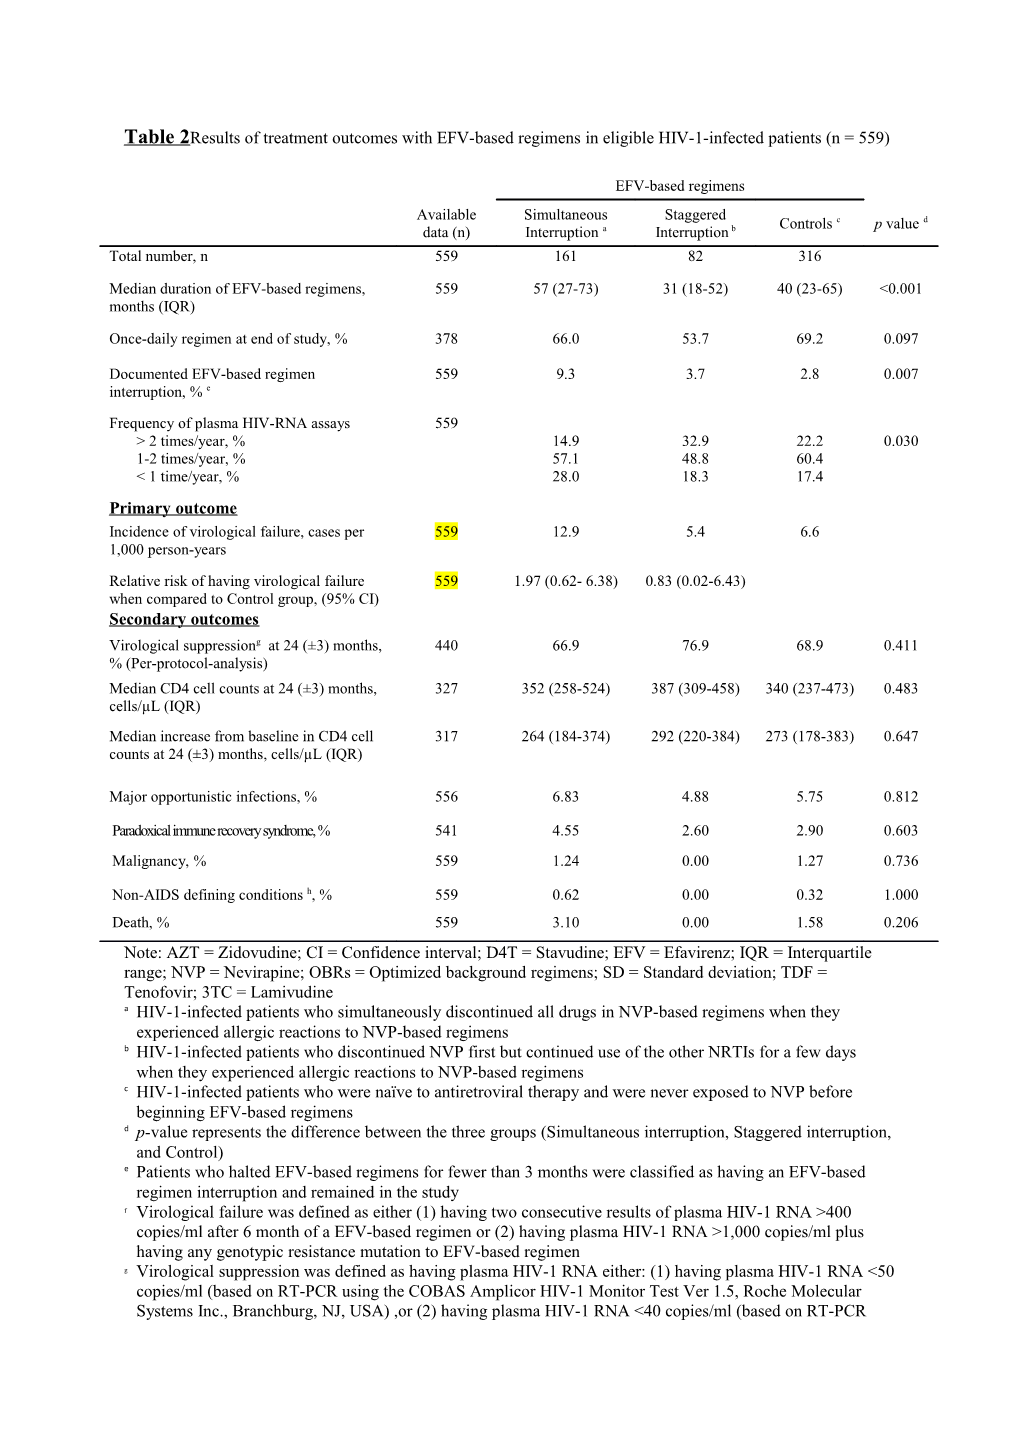 Table 2Results of Treatment Outcomes with EFV-Based Regimens in Eligible HIV-1-Infected